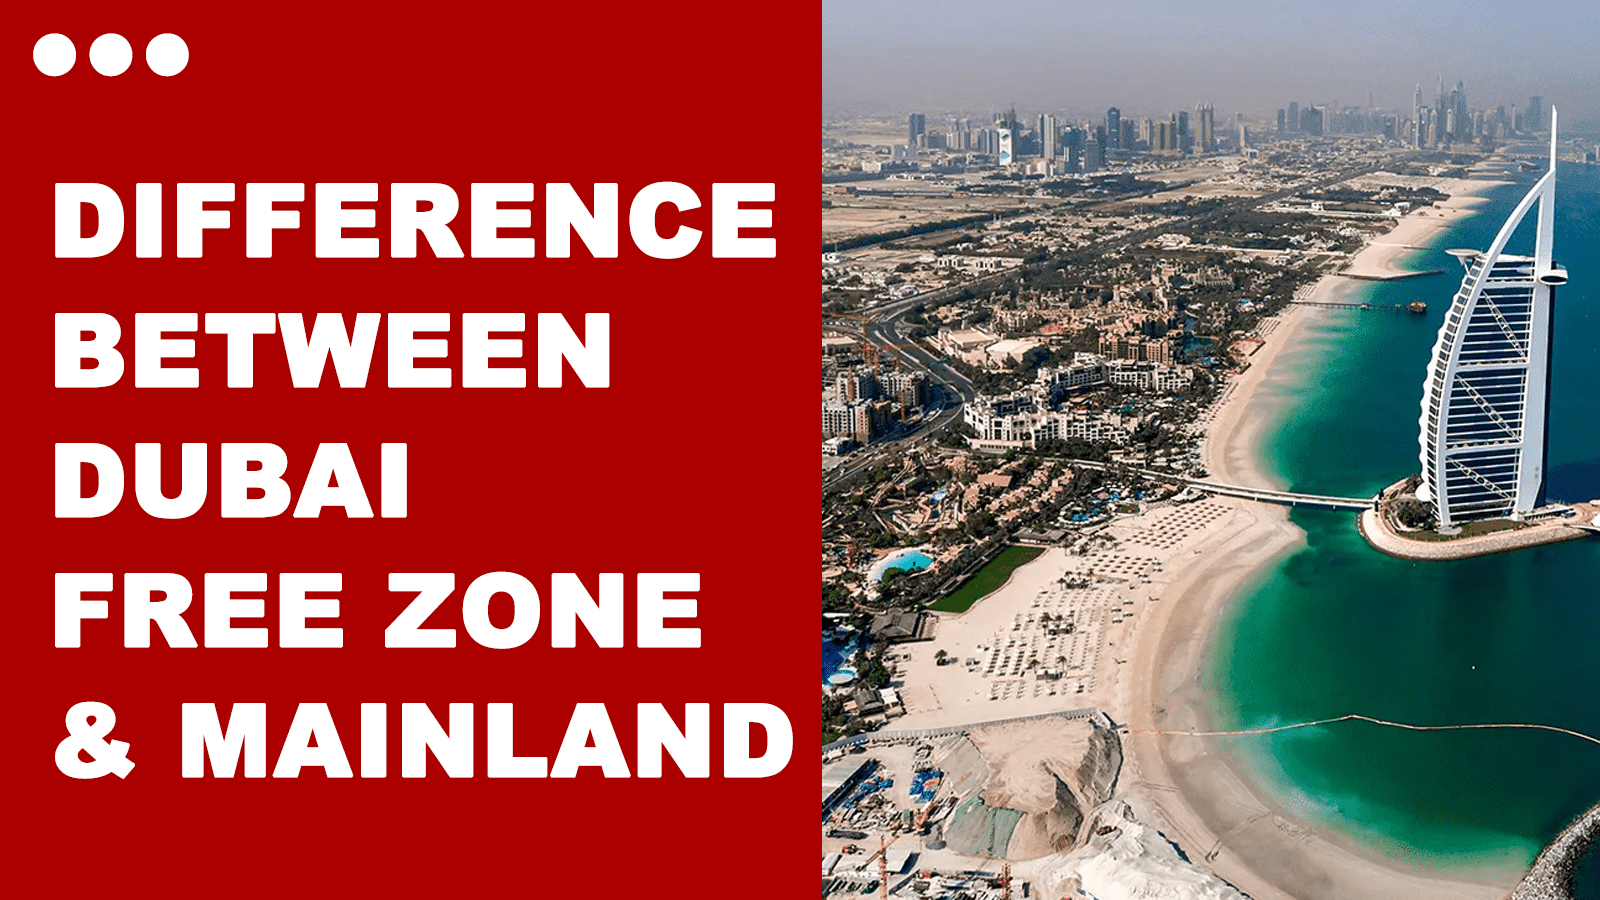 Difference between Dubai Free zone and Mainland